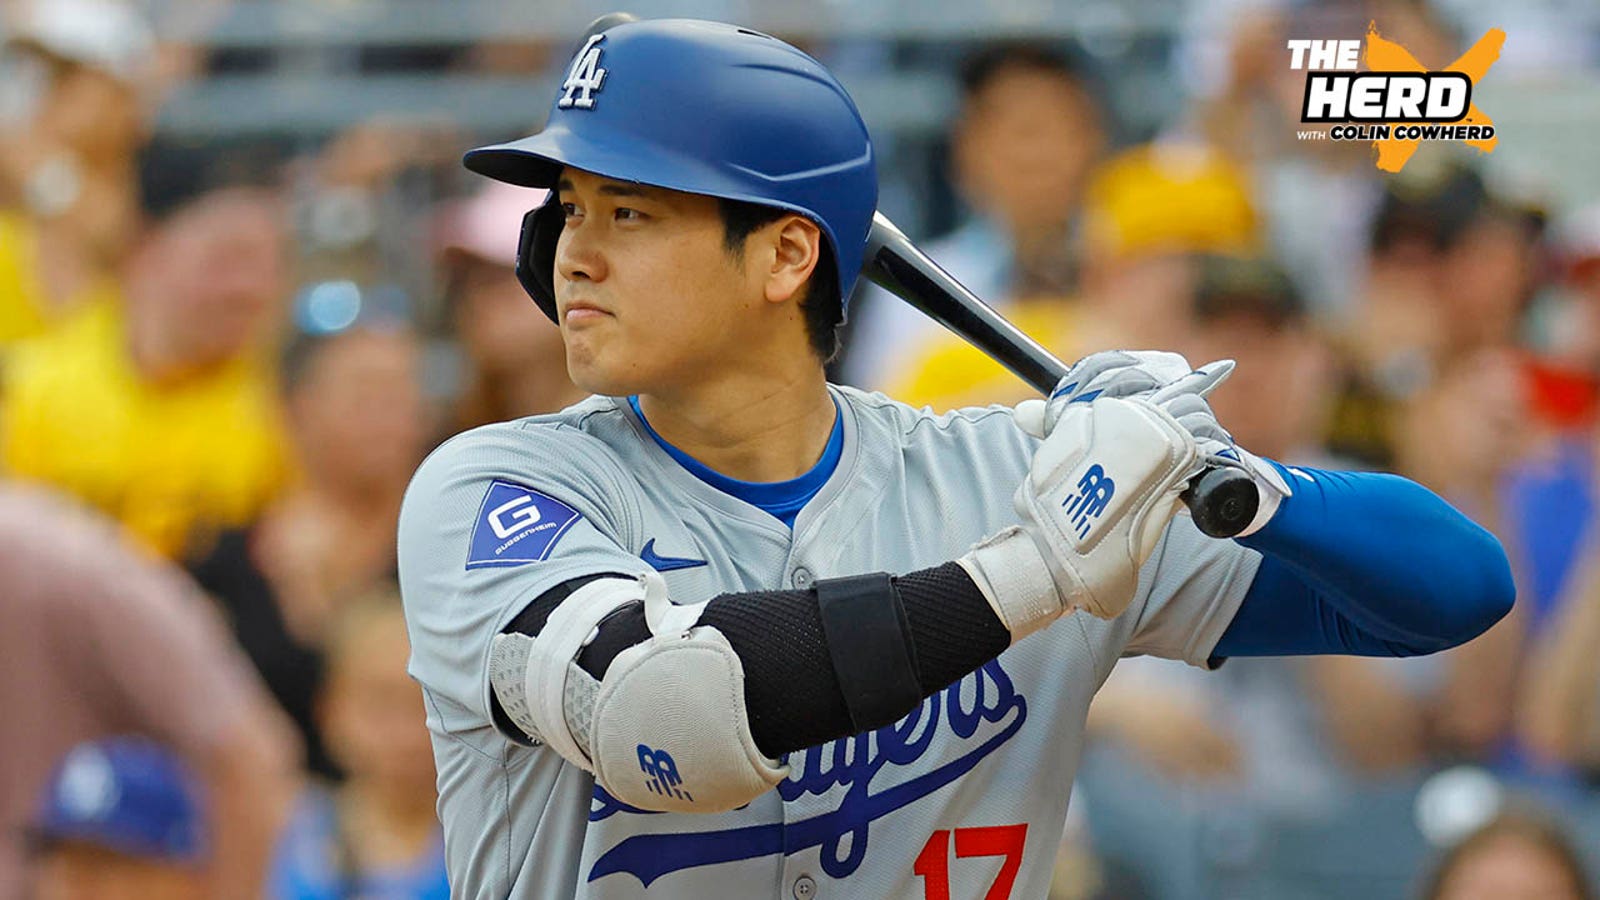 Dodgers manager Dave Roberts on what makes Shohei Ohtani so special